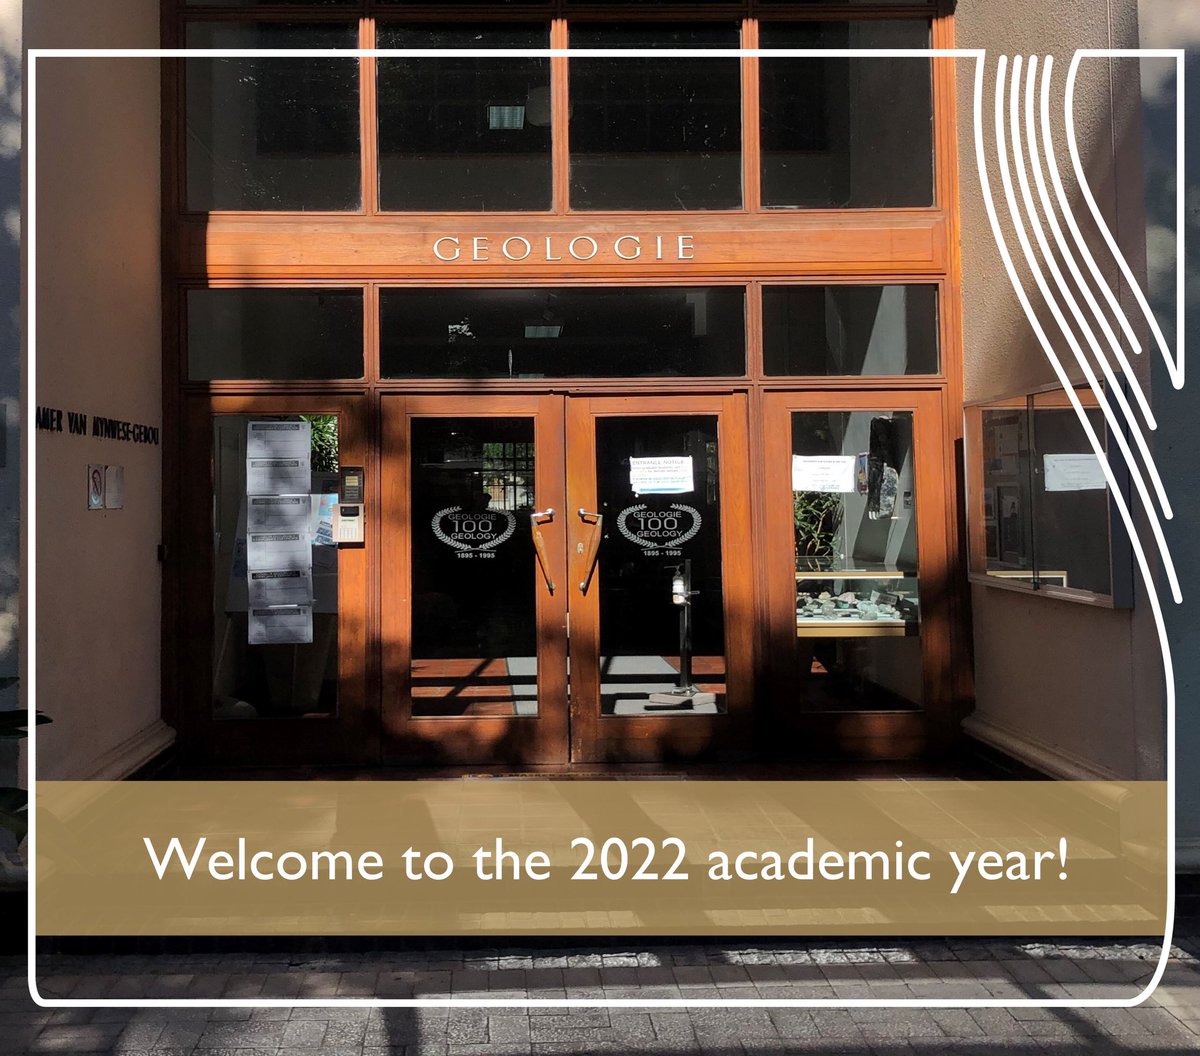 Welcome to 2022! We look forward to a successful year with both new and old students. Follow us to stay in the loop with the latest department news and to gain insight into the life of an Earth Sciences student☺️📚.

#University #NewYear2022 #geology #earthsciences #welcome2022